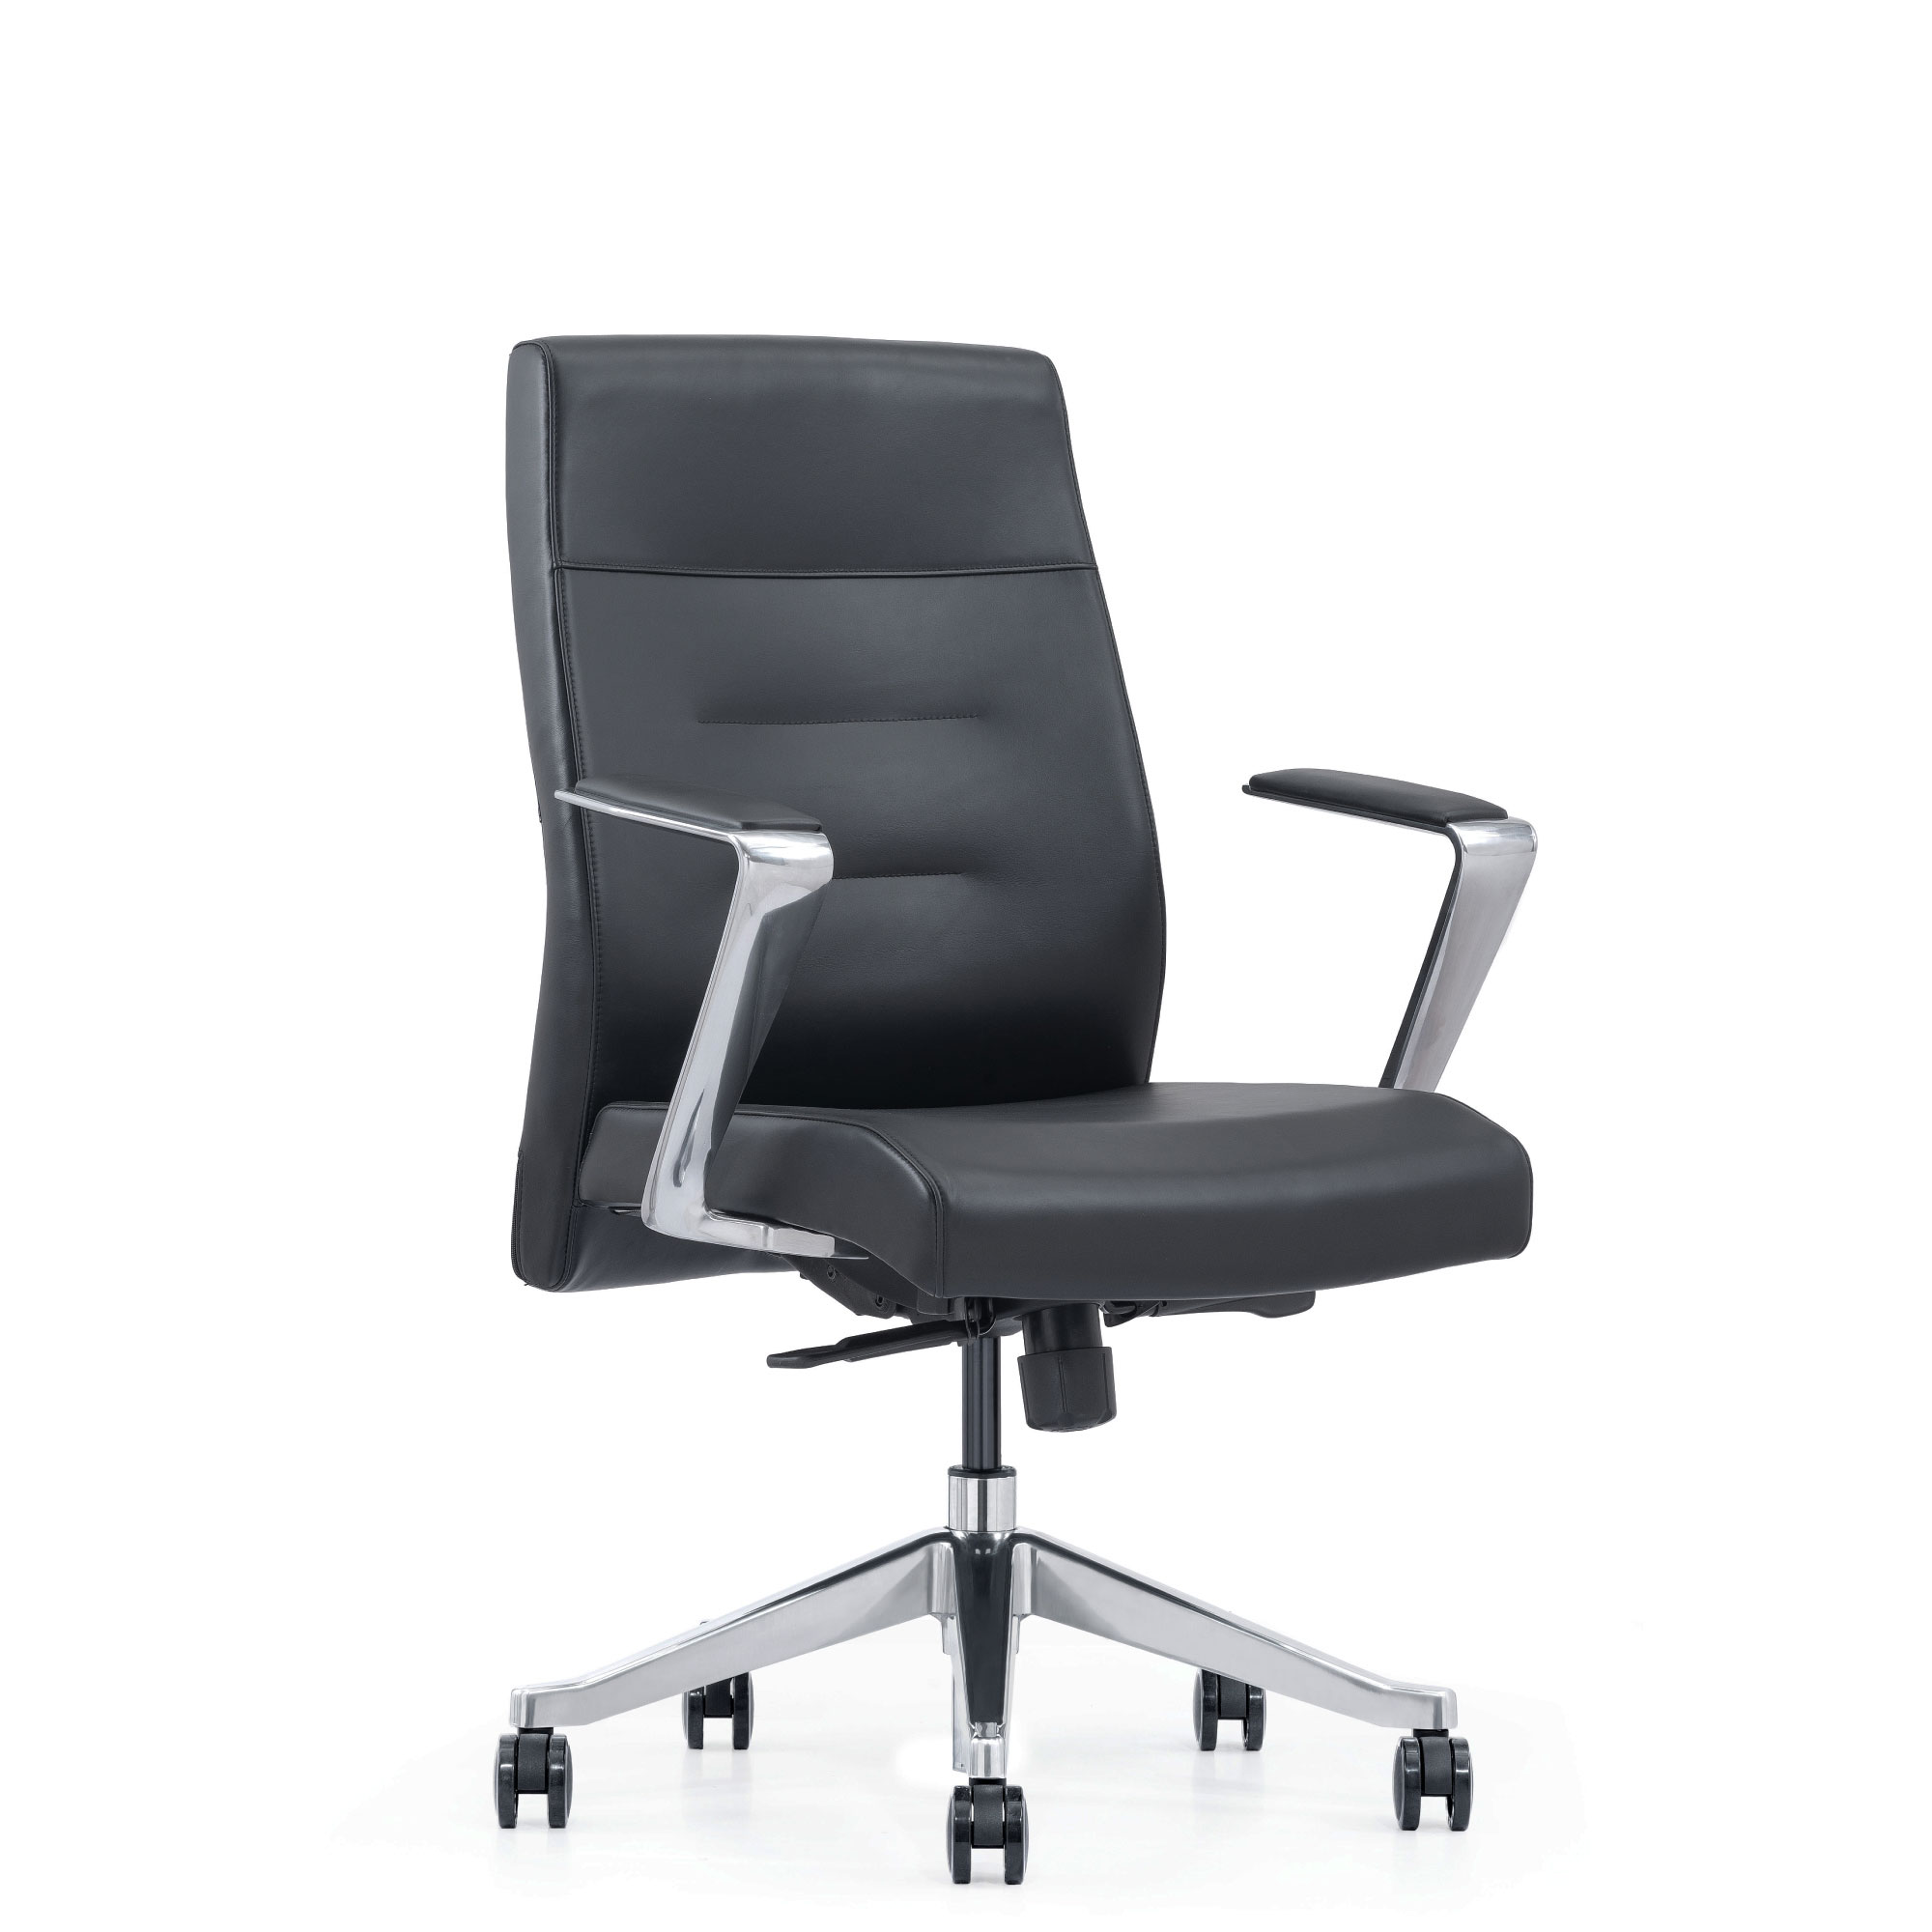 Home office chair with arms and wheels